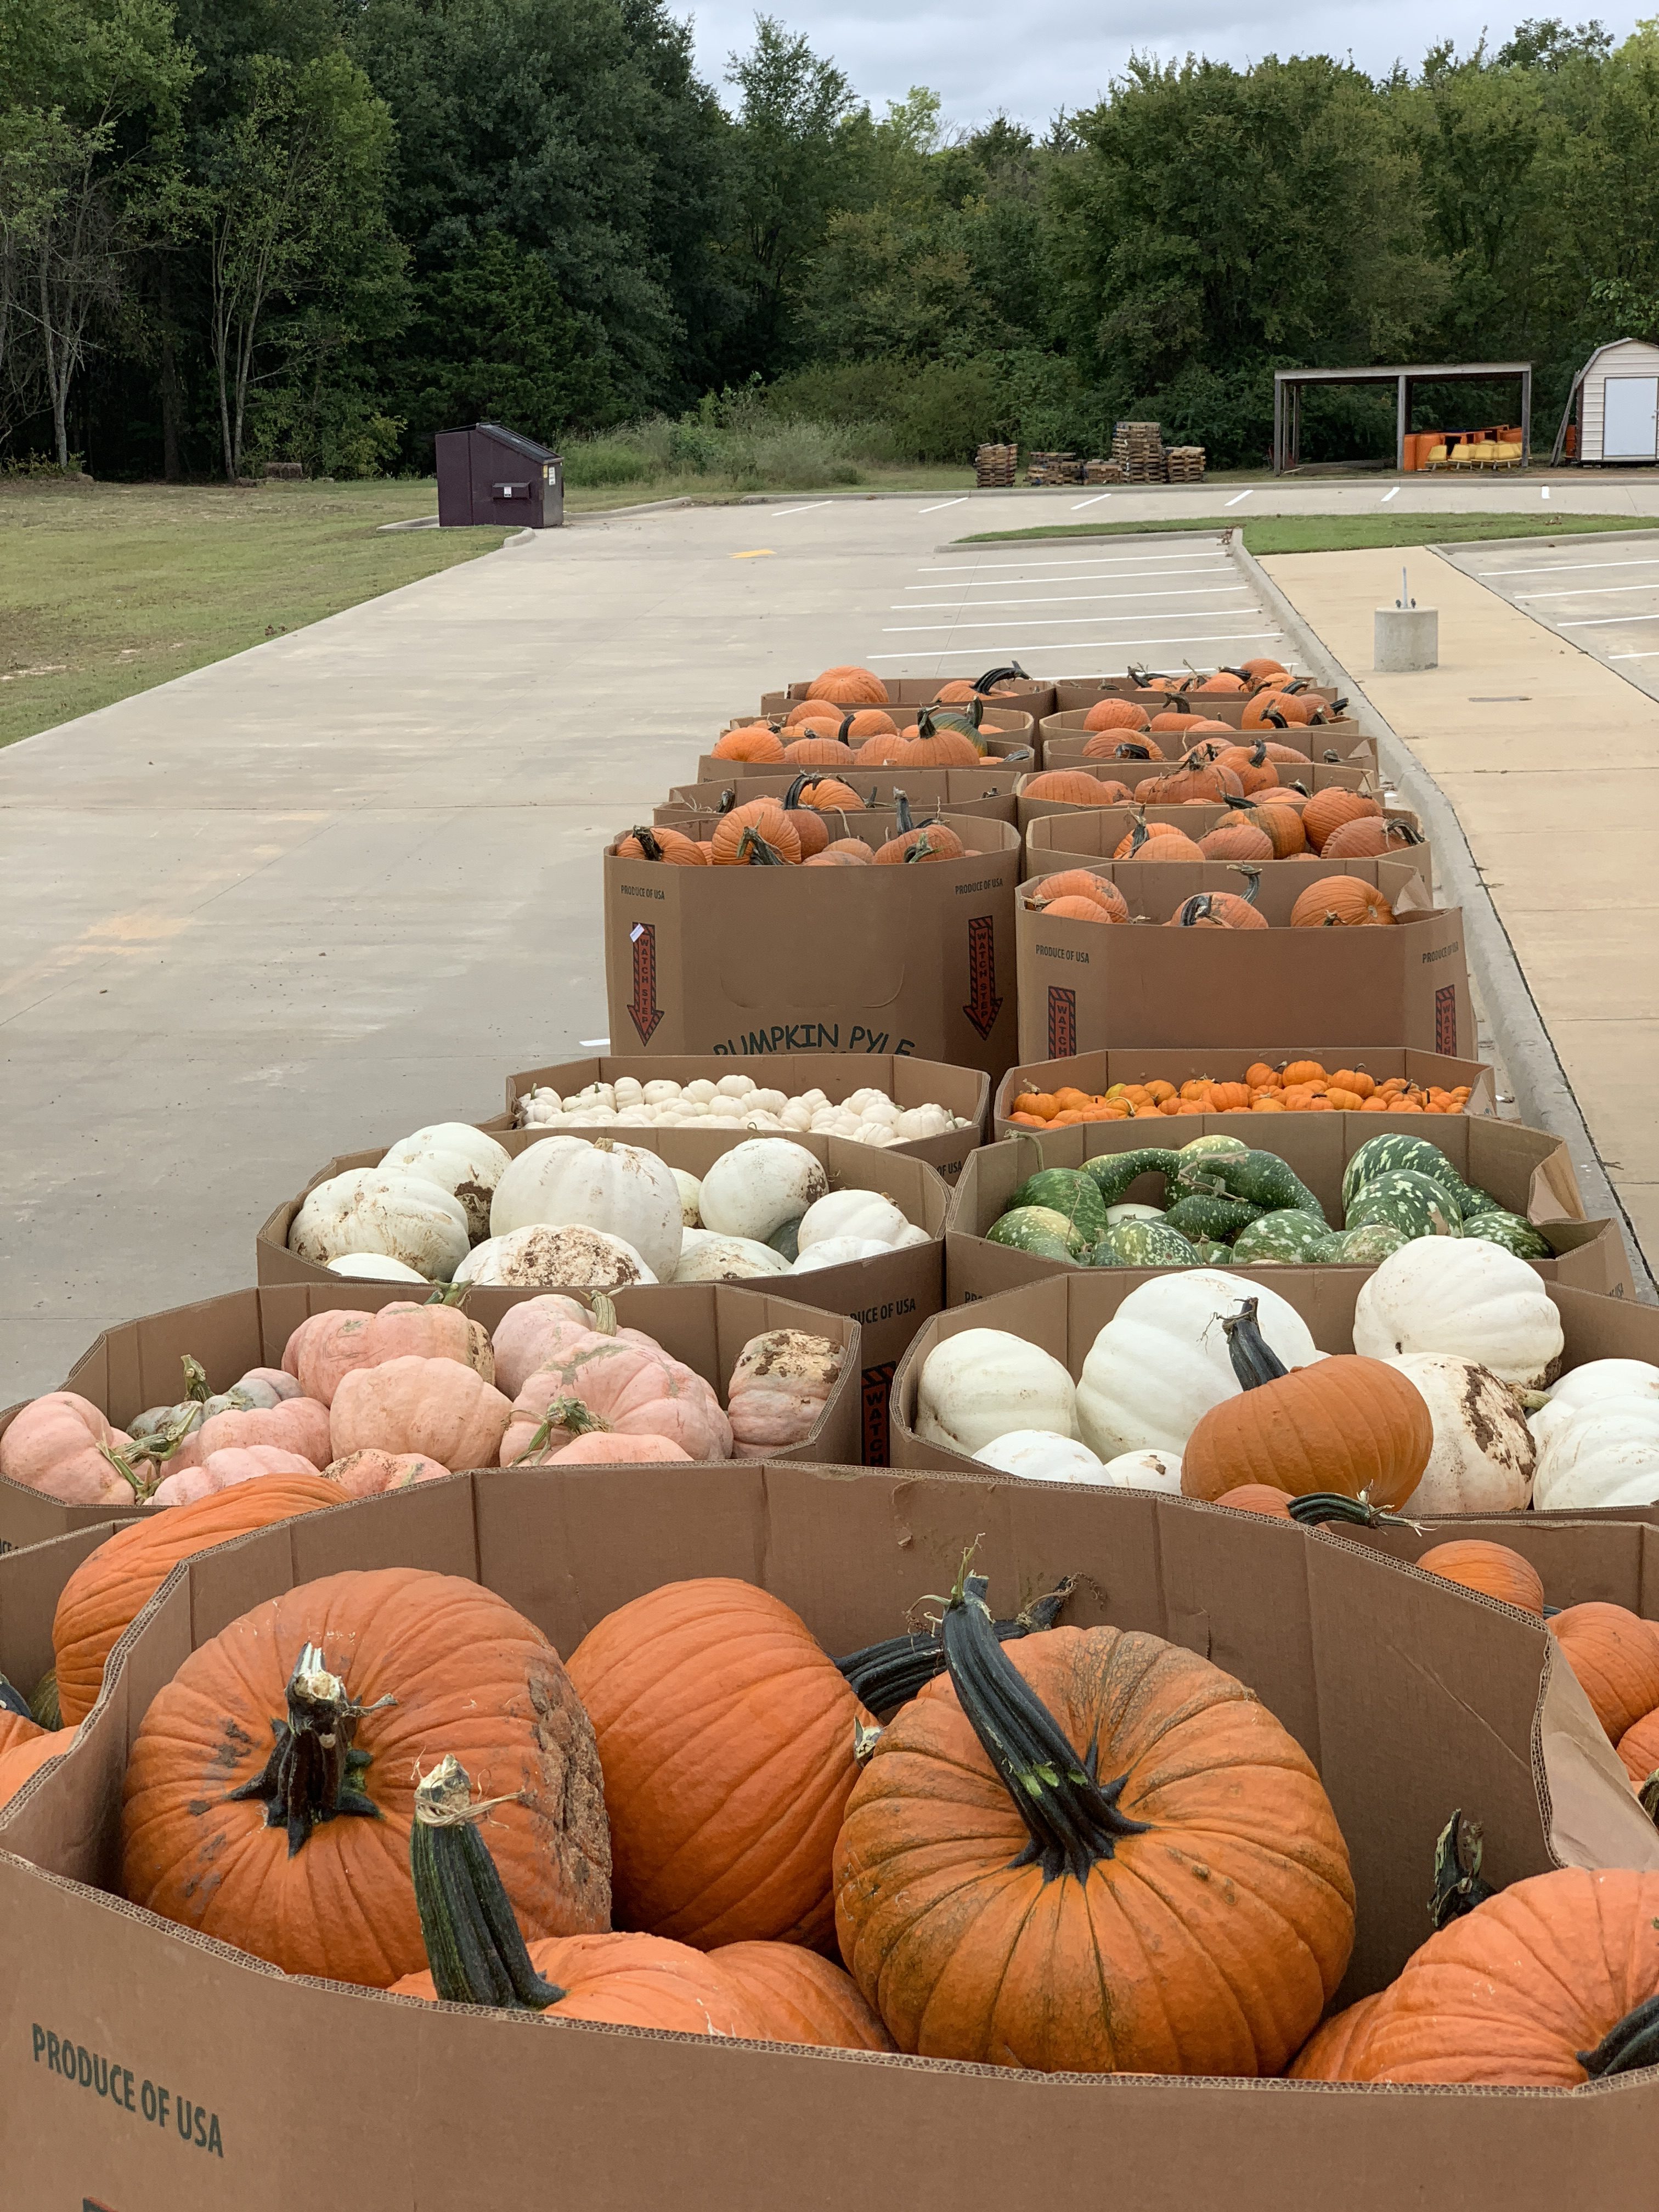 Pumpkins Delivered to SOC Pumpkin Patch This Morning. Pumpkin Patch Opens Saturday, October 6th.